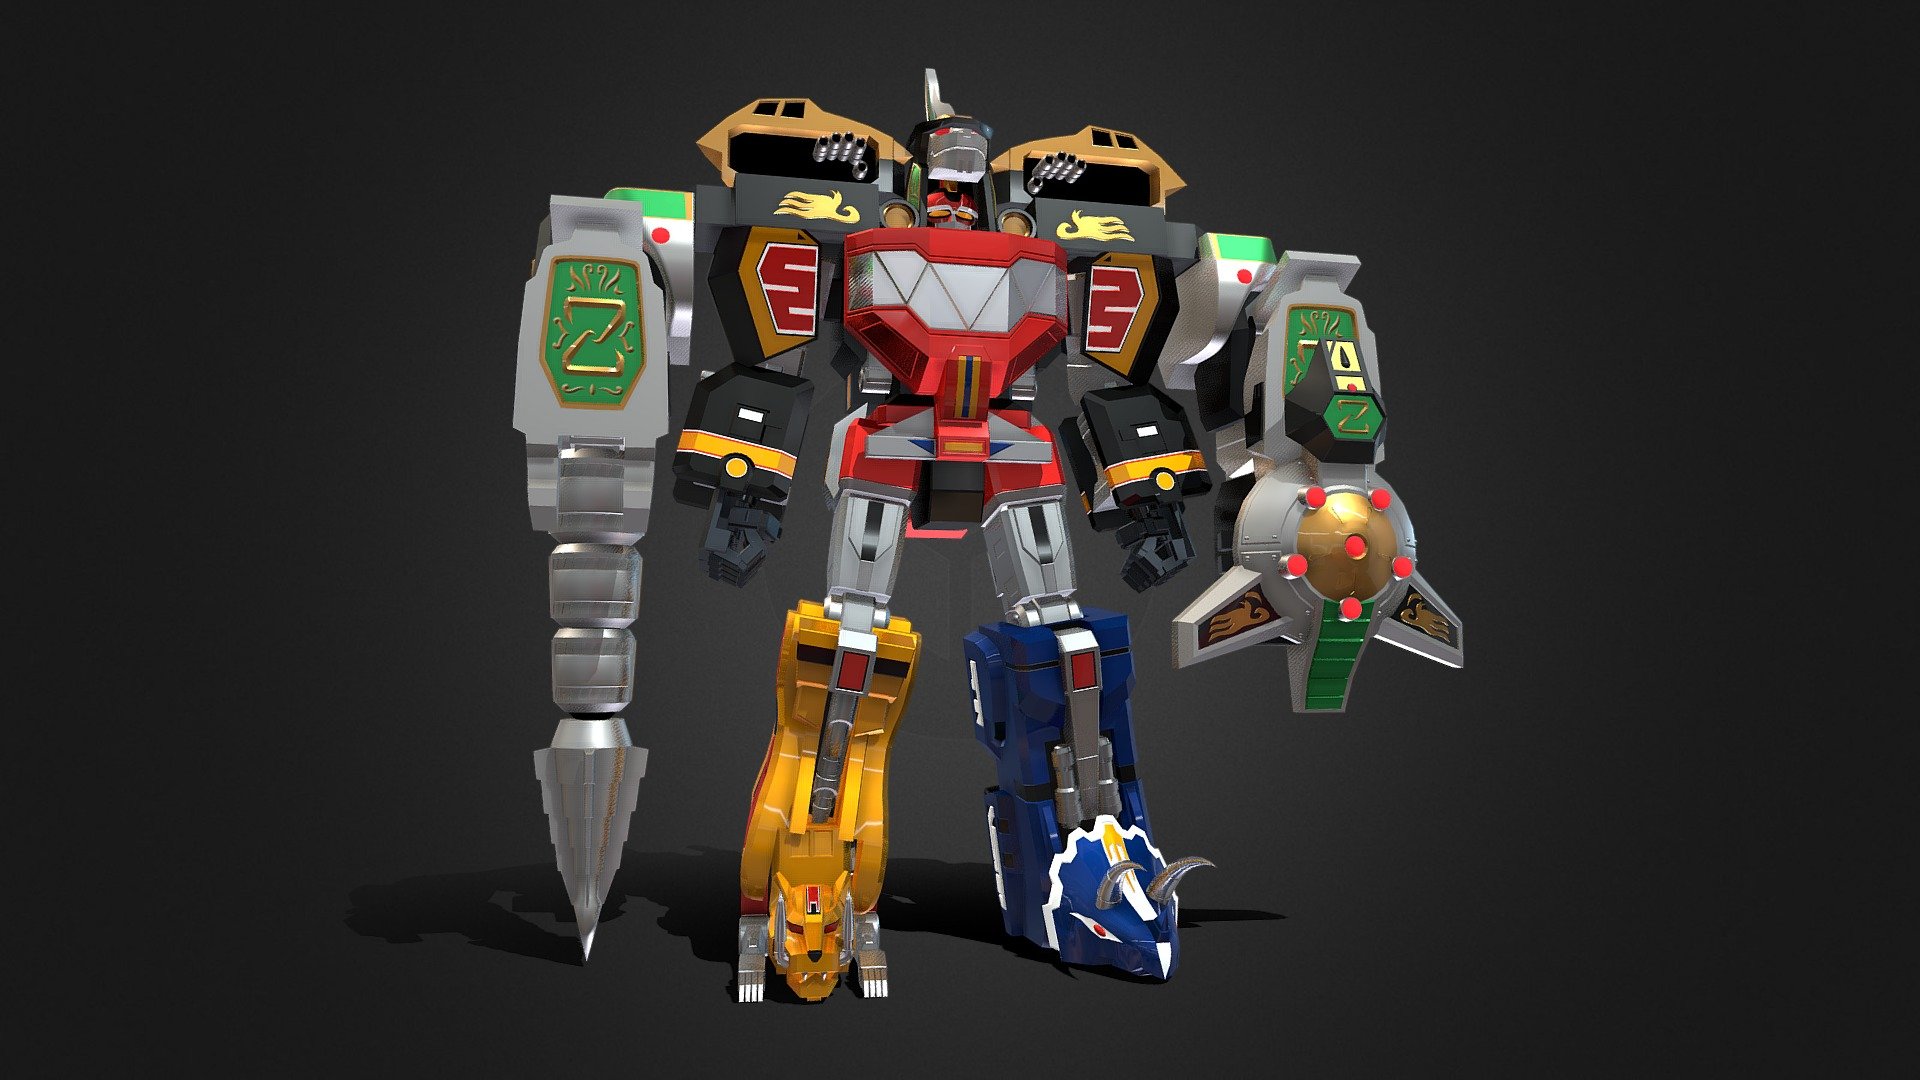 If you're interested in purchasing any of my models, contact me @ andrewdisaacs@yahoo.com

The combined mecha  from Mighty Morphin Power Rangers.  Based mostly on the Soul of Chogokin figures.

Made in 3DS Max by myself 3d model